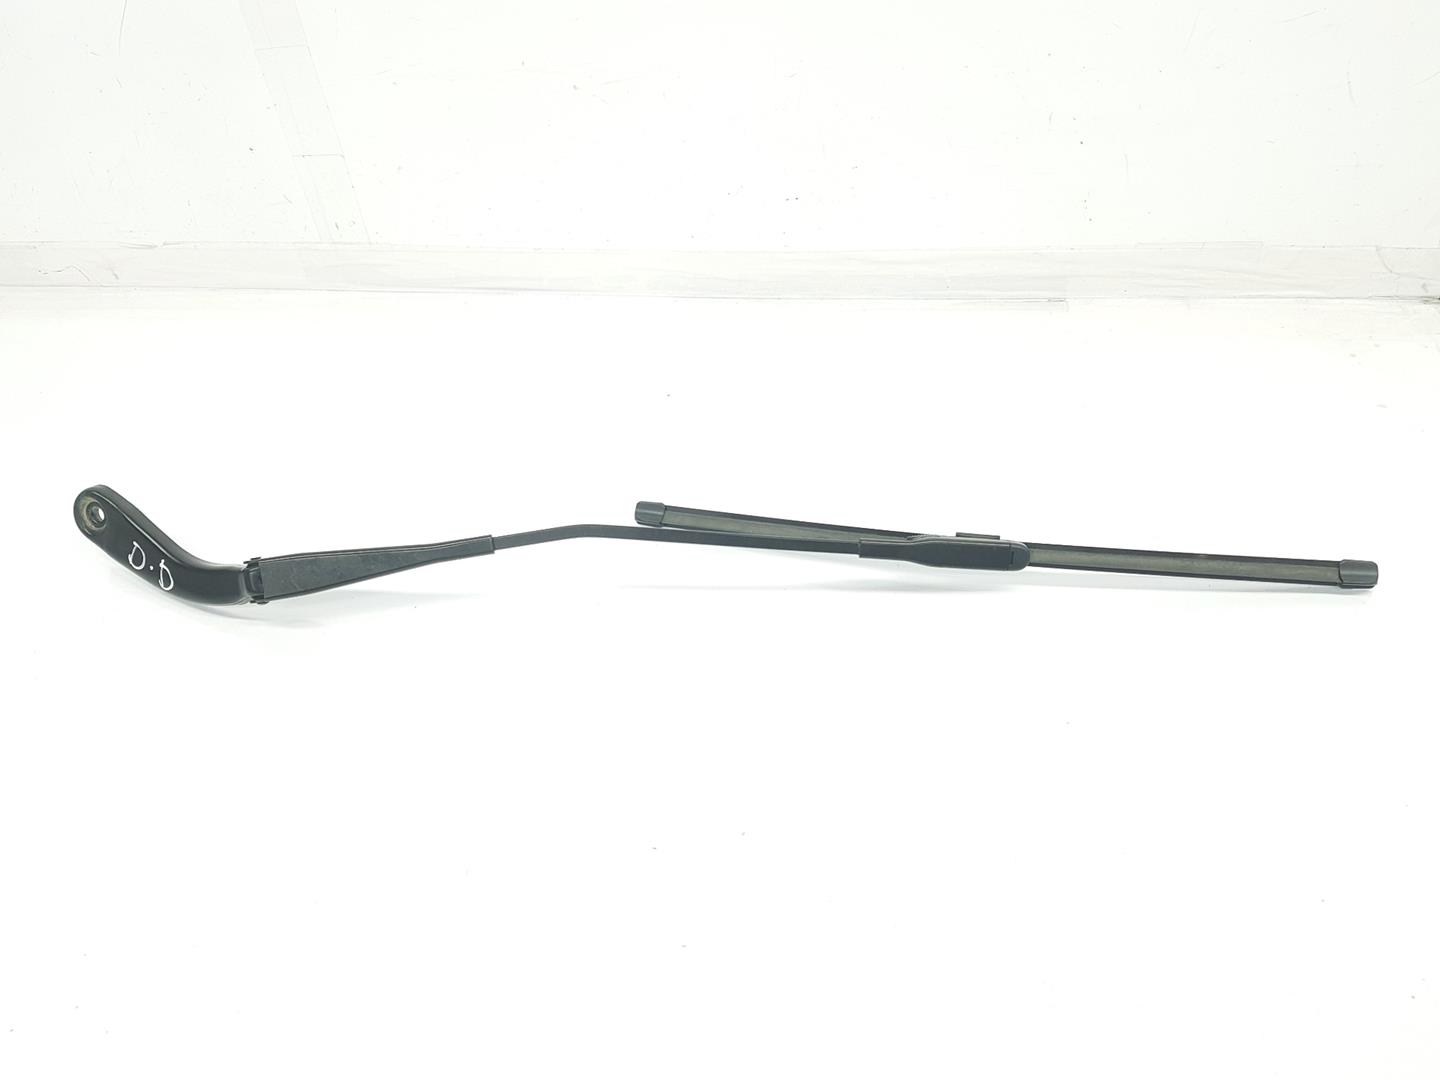 BMW 2 Series F22/F23 (2013-2020) Front Wiper Arms 61617239520, 61619465063 21052180